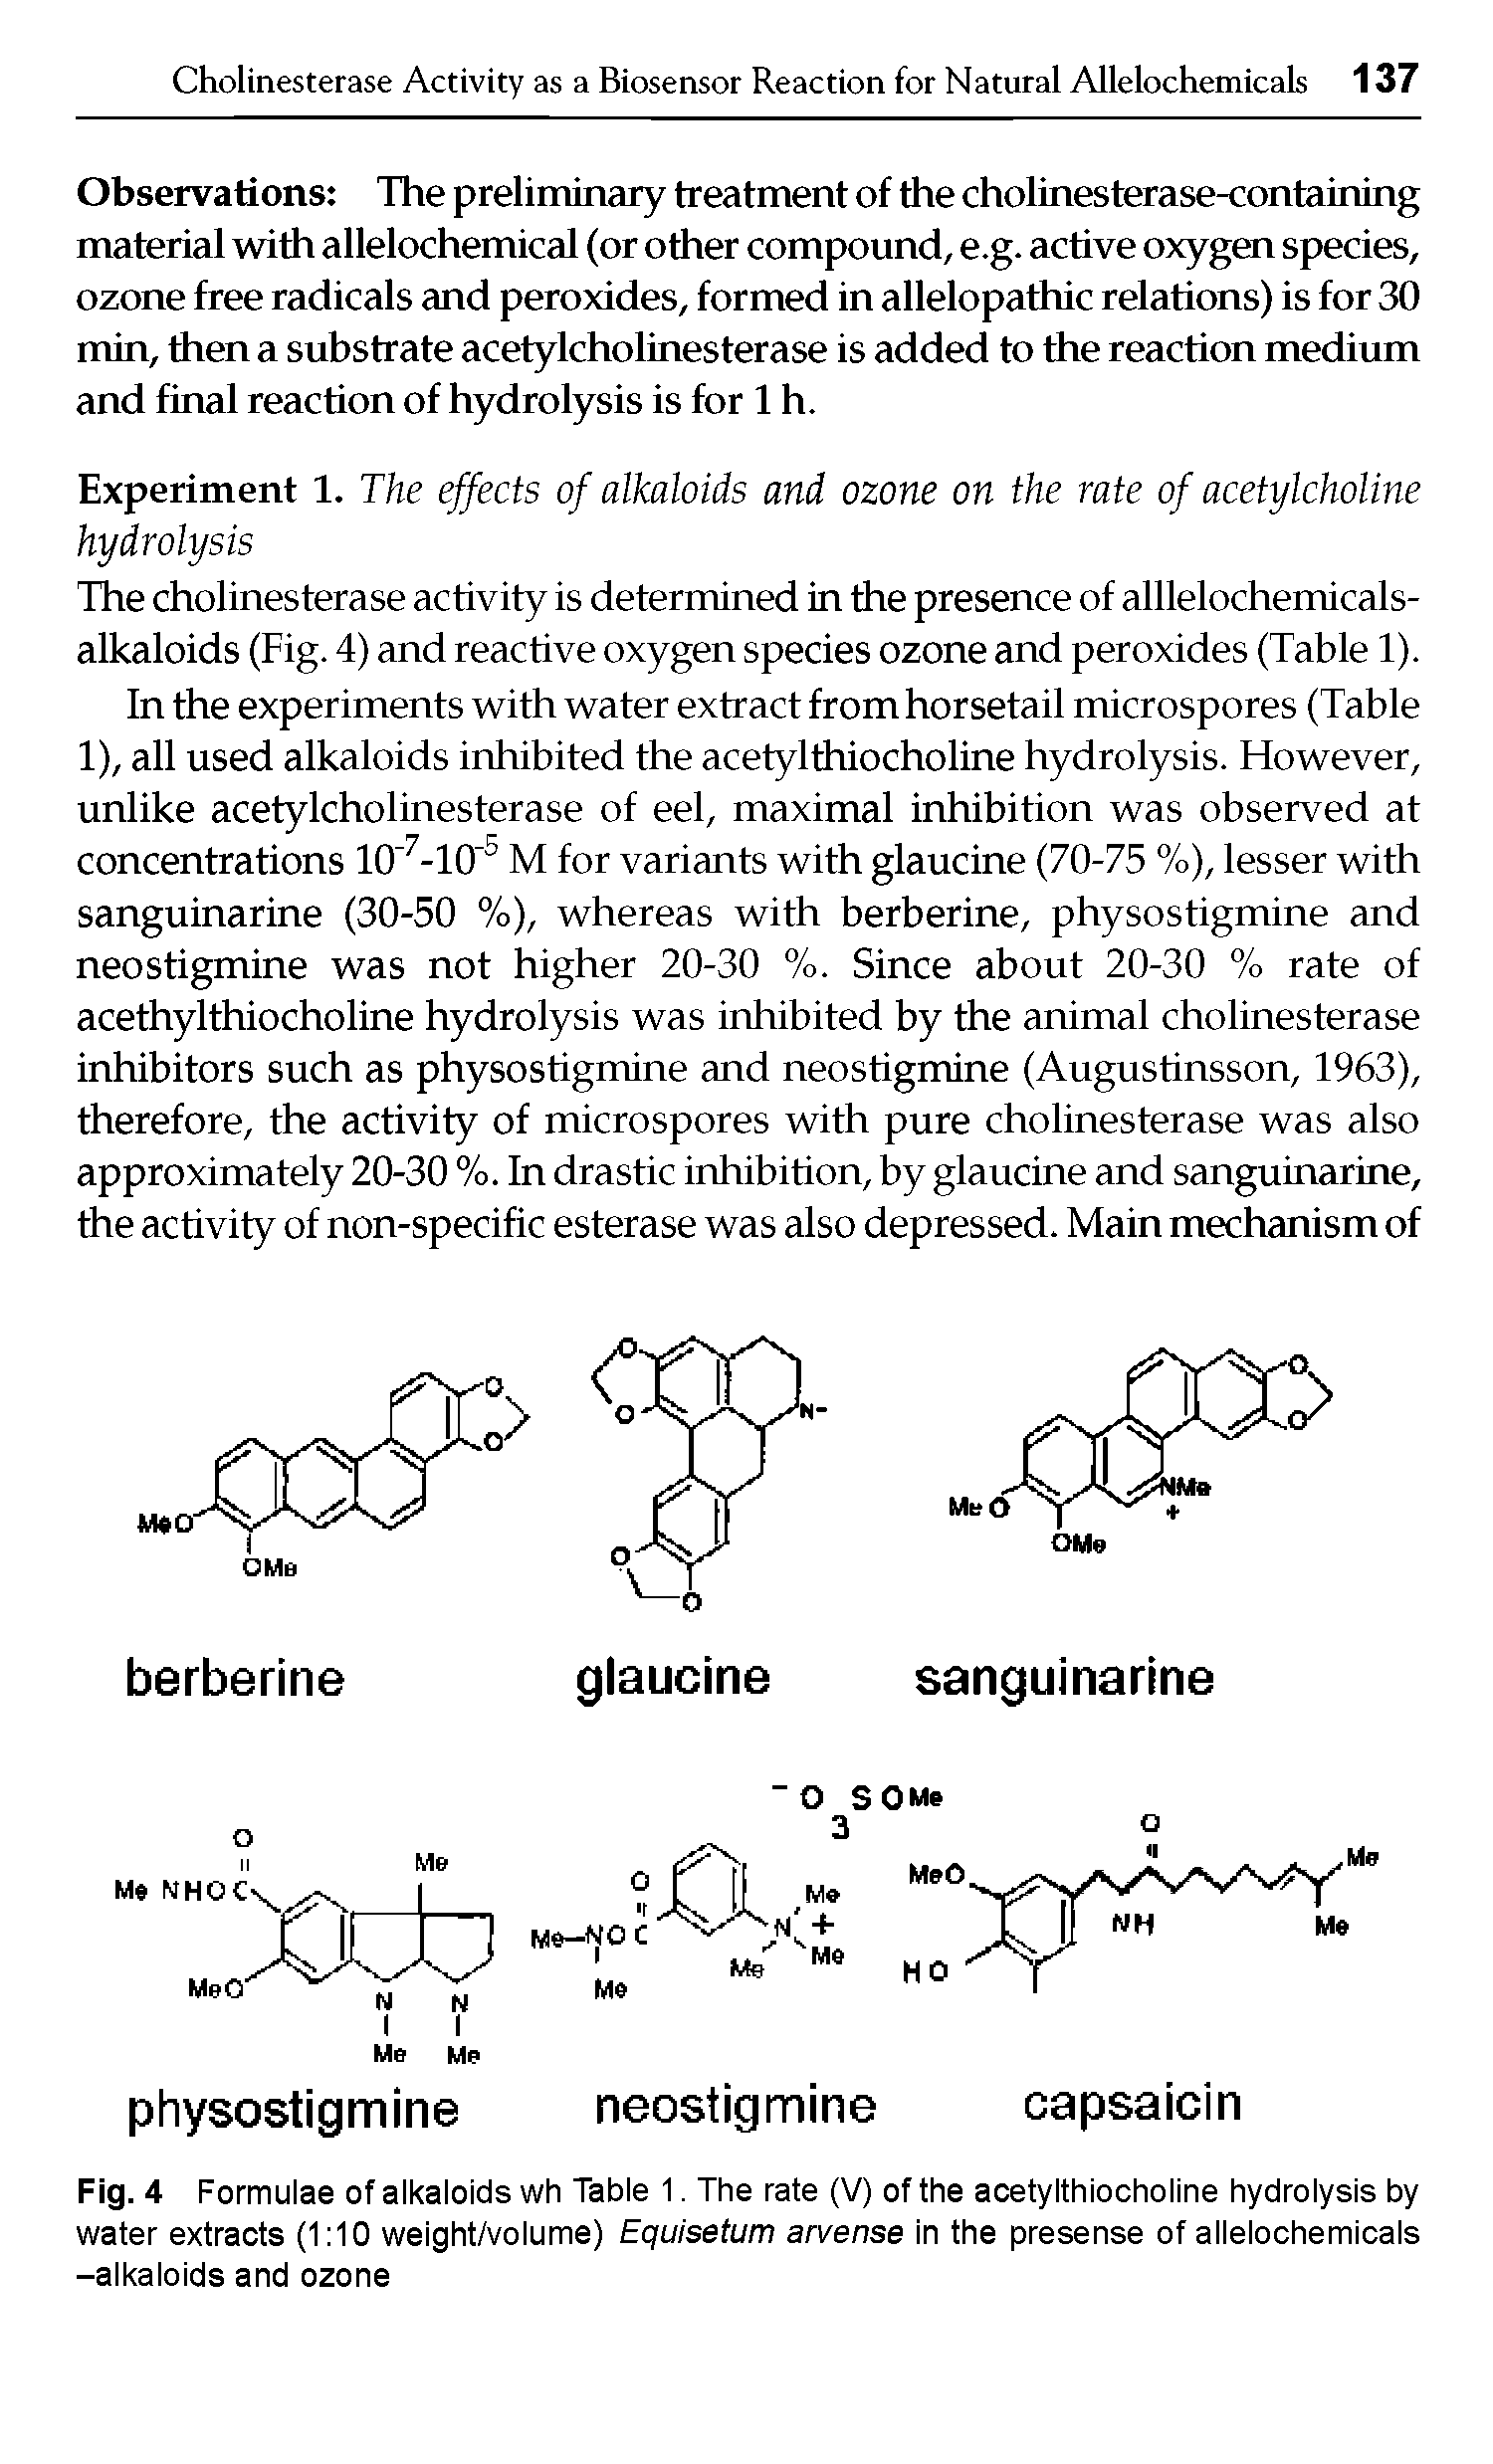 Fig. 4 Formulae of alkaloids wh Table 1. The rate (V) of the acetylthiocholine hydrolysis by water extracts (1 10 weight/volume) Equisetum arvense in the presense of allelochemicals -alkaloids and ozone...